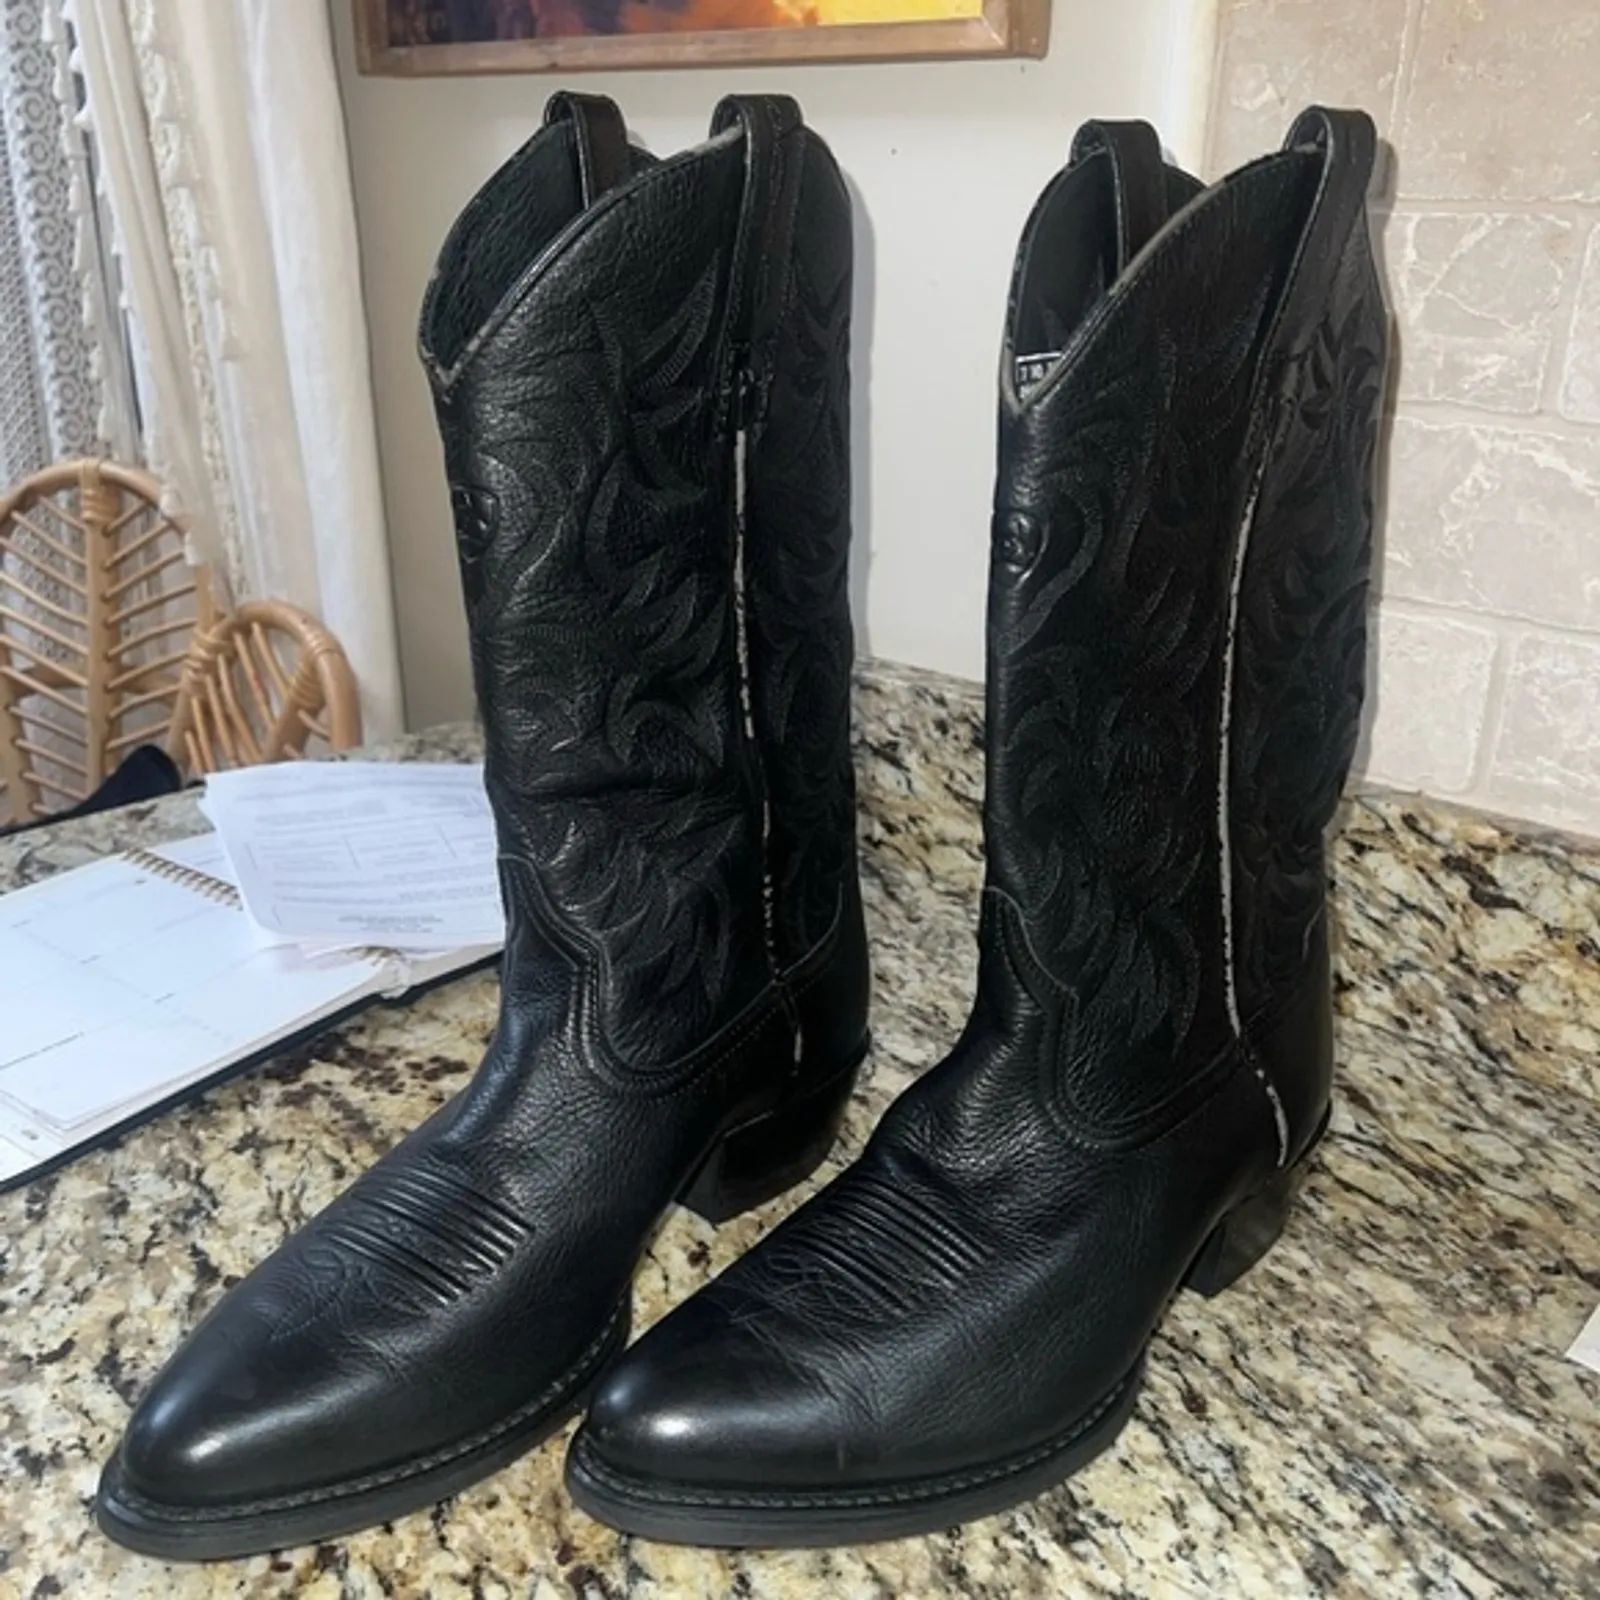 Women's Ariat Heritage Western Boot - Black Cowgirl Boots | eBay US